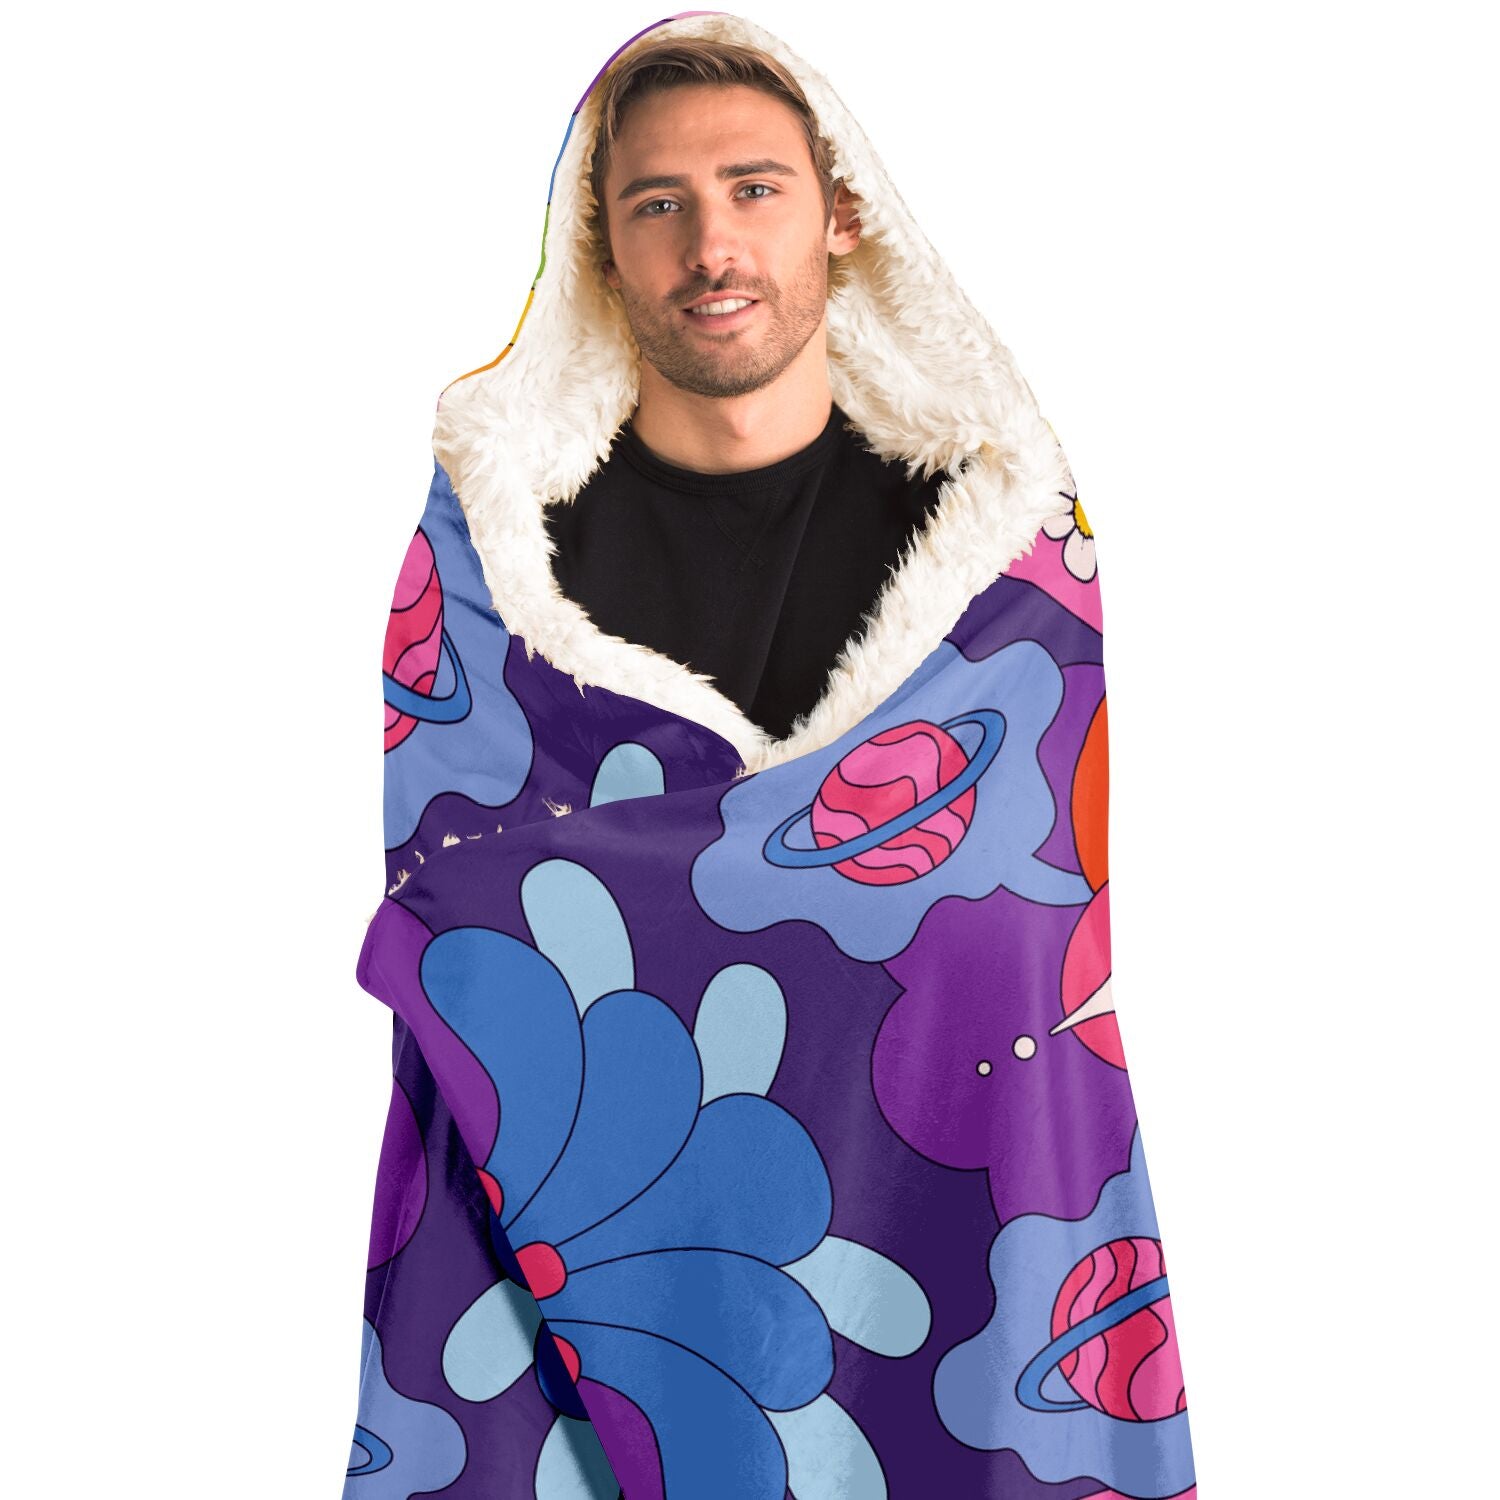 Trippy Hooded Blanket, Psychedelic Colorful Eye Sherpa Fleece Throw Fluffy Cozy Warm Adult Men Women Kids Large Gift Starcove Fashion